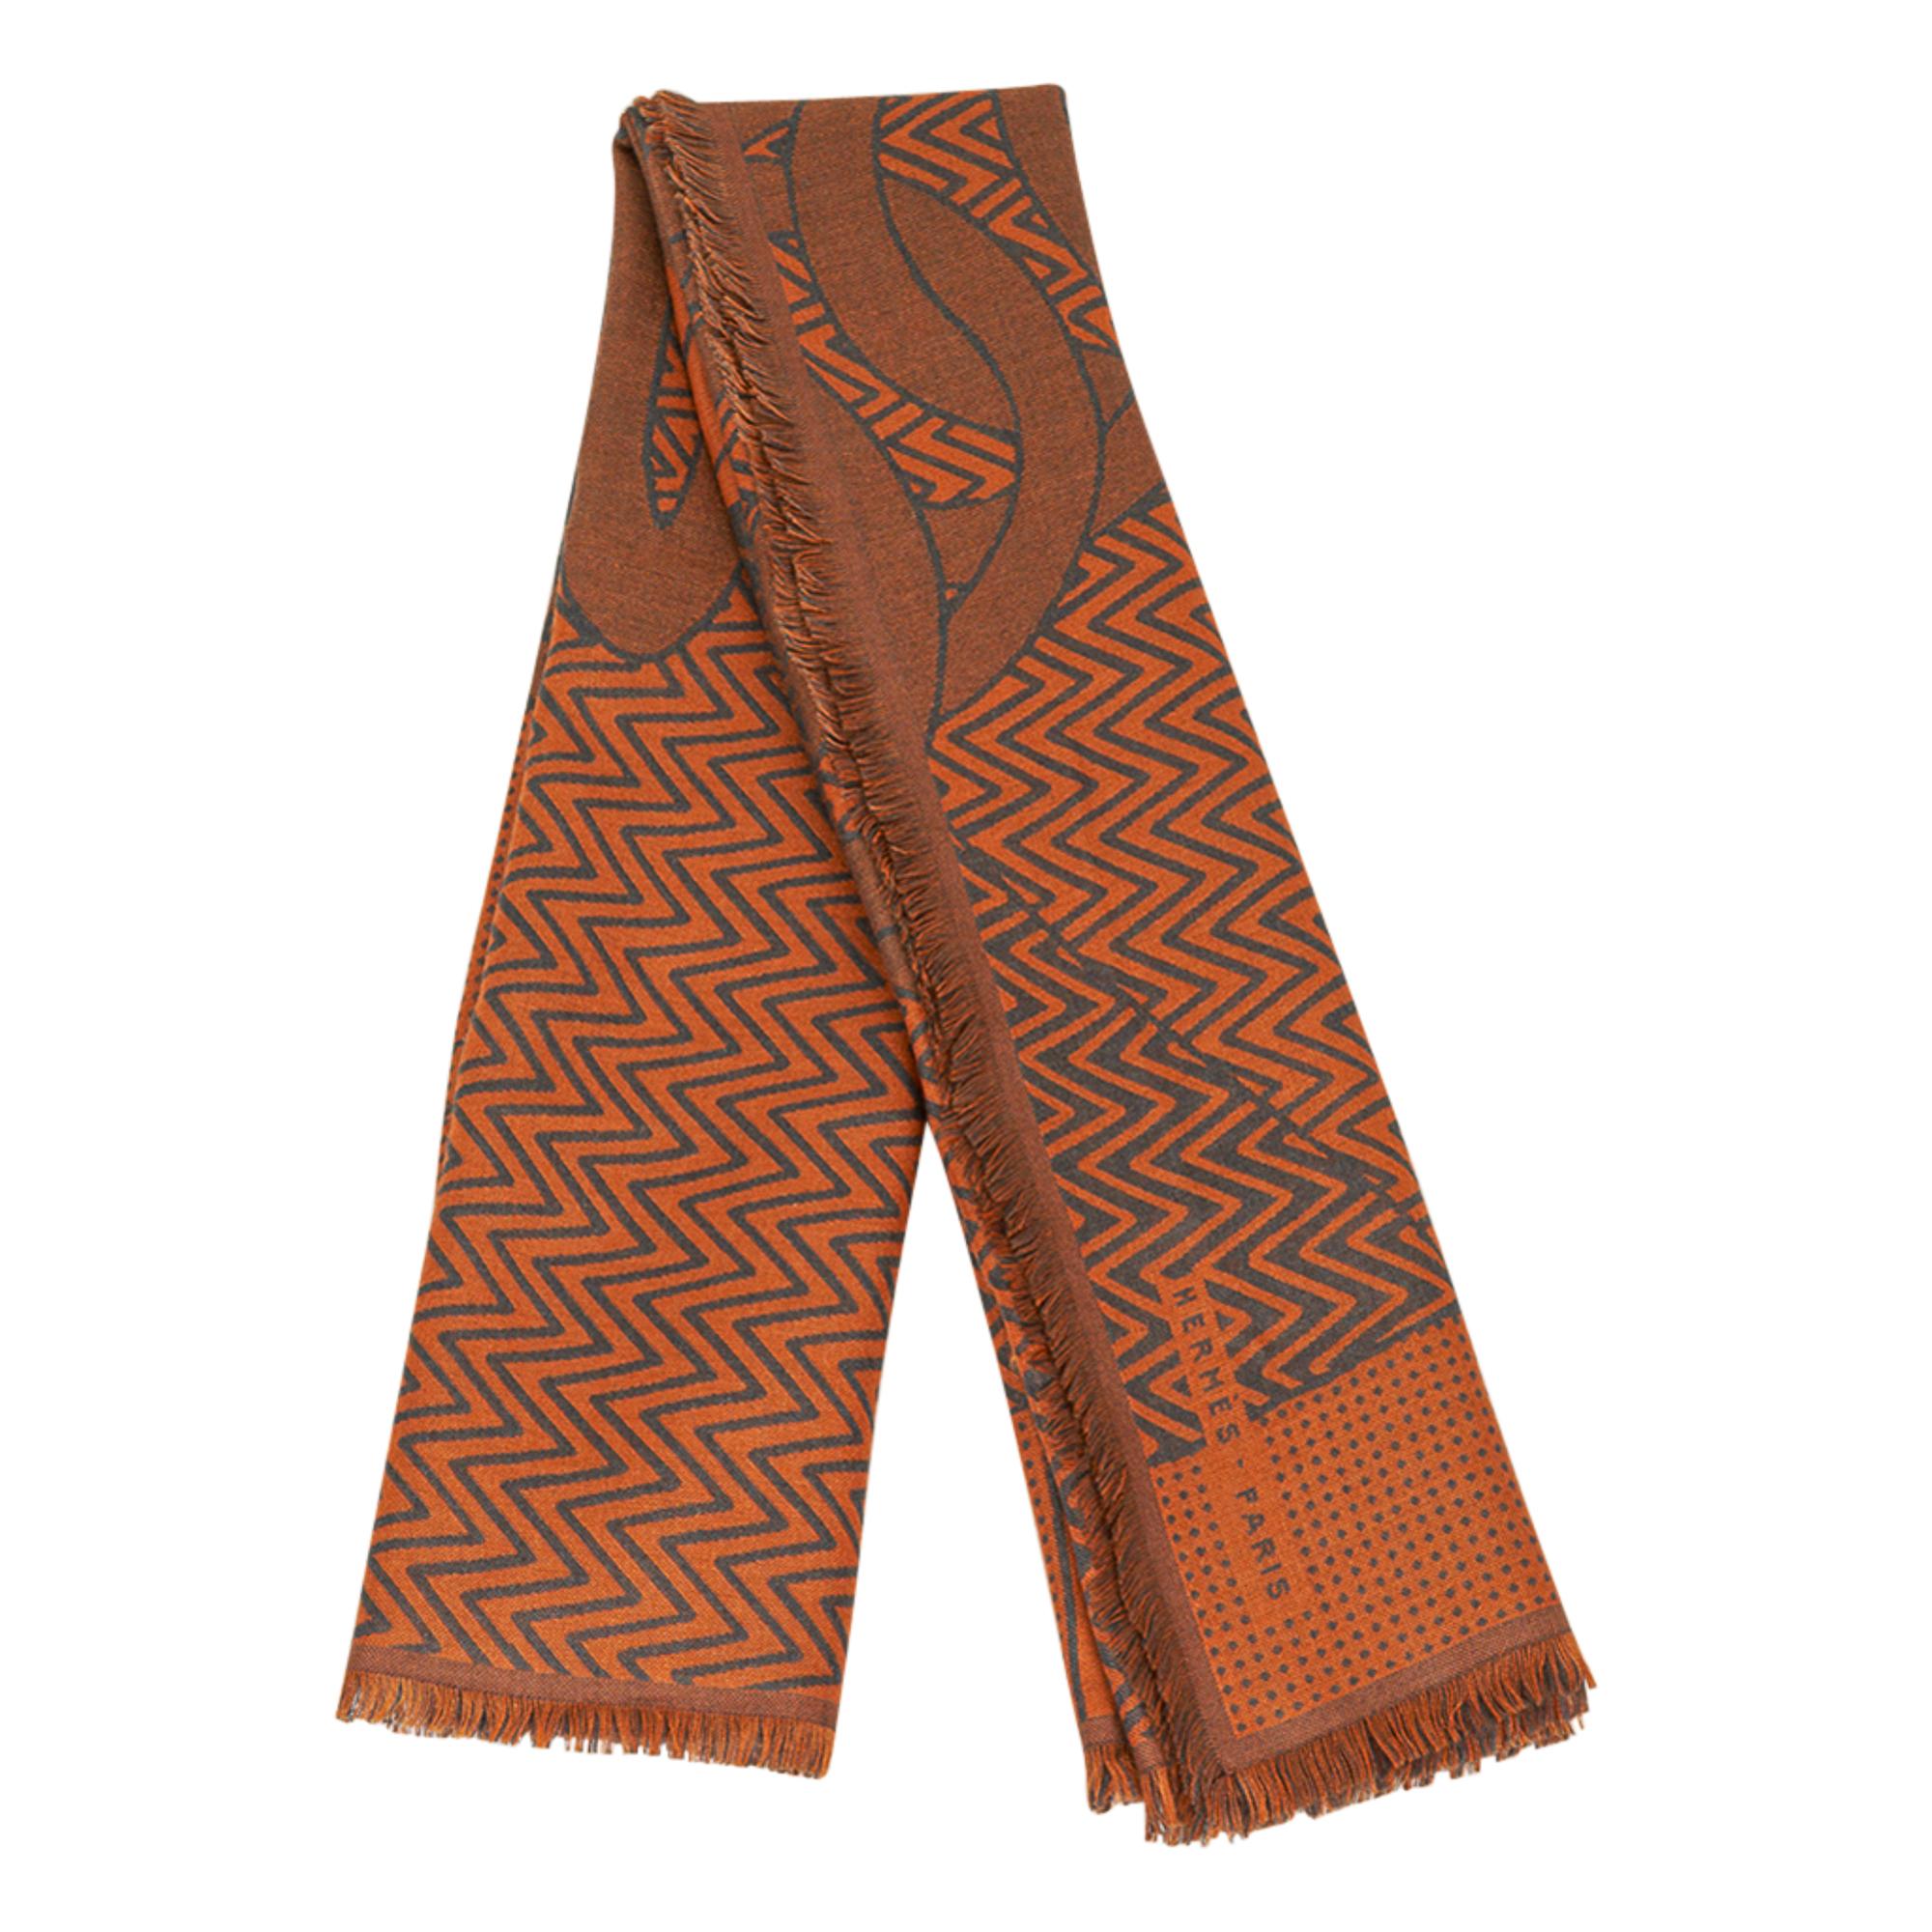 Guaranteed authentic Hermes Harnais De Cabriolet Reversible 100 Cashmere and Silk scarf.  
The double sided weave reverses the colours for you to enjoy to wear either way.
Designed by Cyrille Diatkine.
Beautiful and subtle in Orange and Gris.
Small